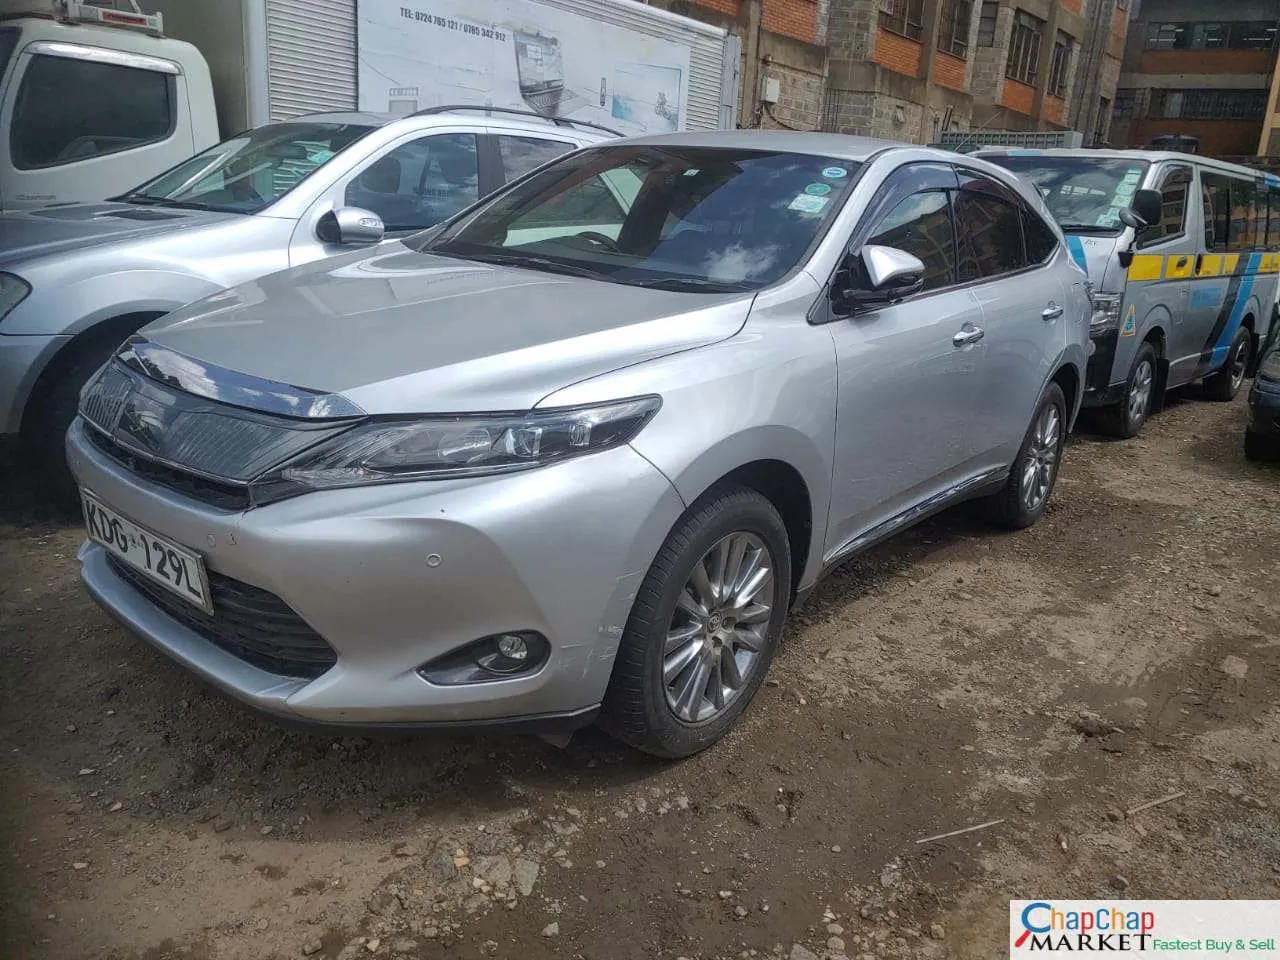 Cars Cars For Sale/Vehicles-Toyota Harrier QUICK SALE 🔥 You Pay 30% Deposit Trade in OK EXCLUSIVE 7